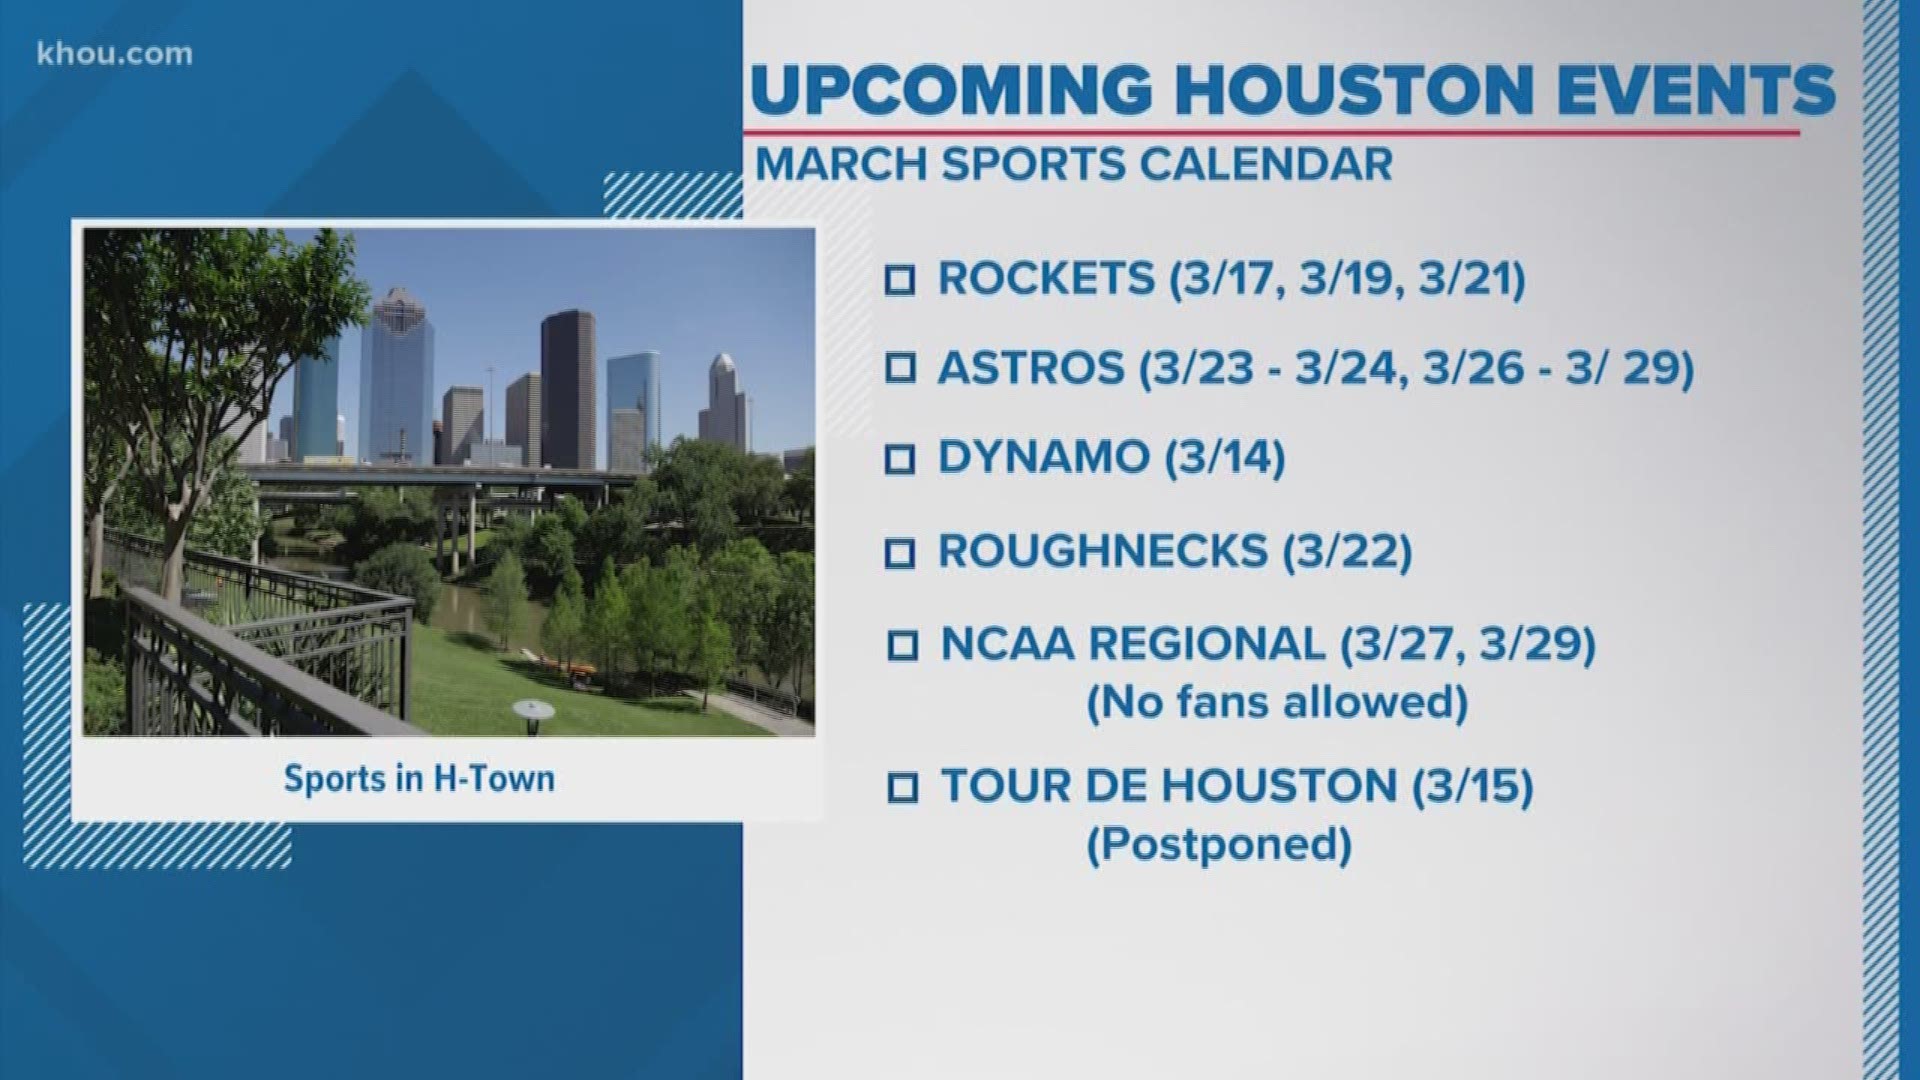 After the NBA suspended its season due to a player testing positive for coronavirus, KHOU 11 Sports' Daniel Gotera takes a look at the near future for Houston teams.